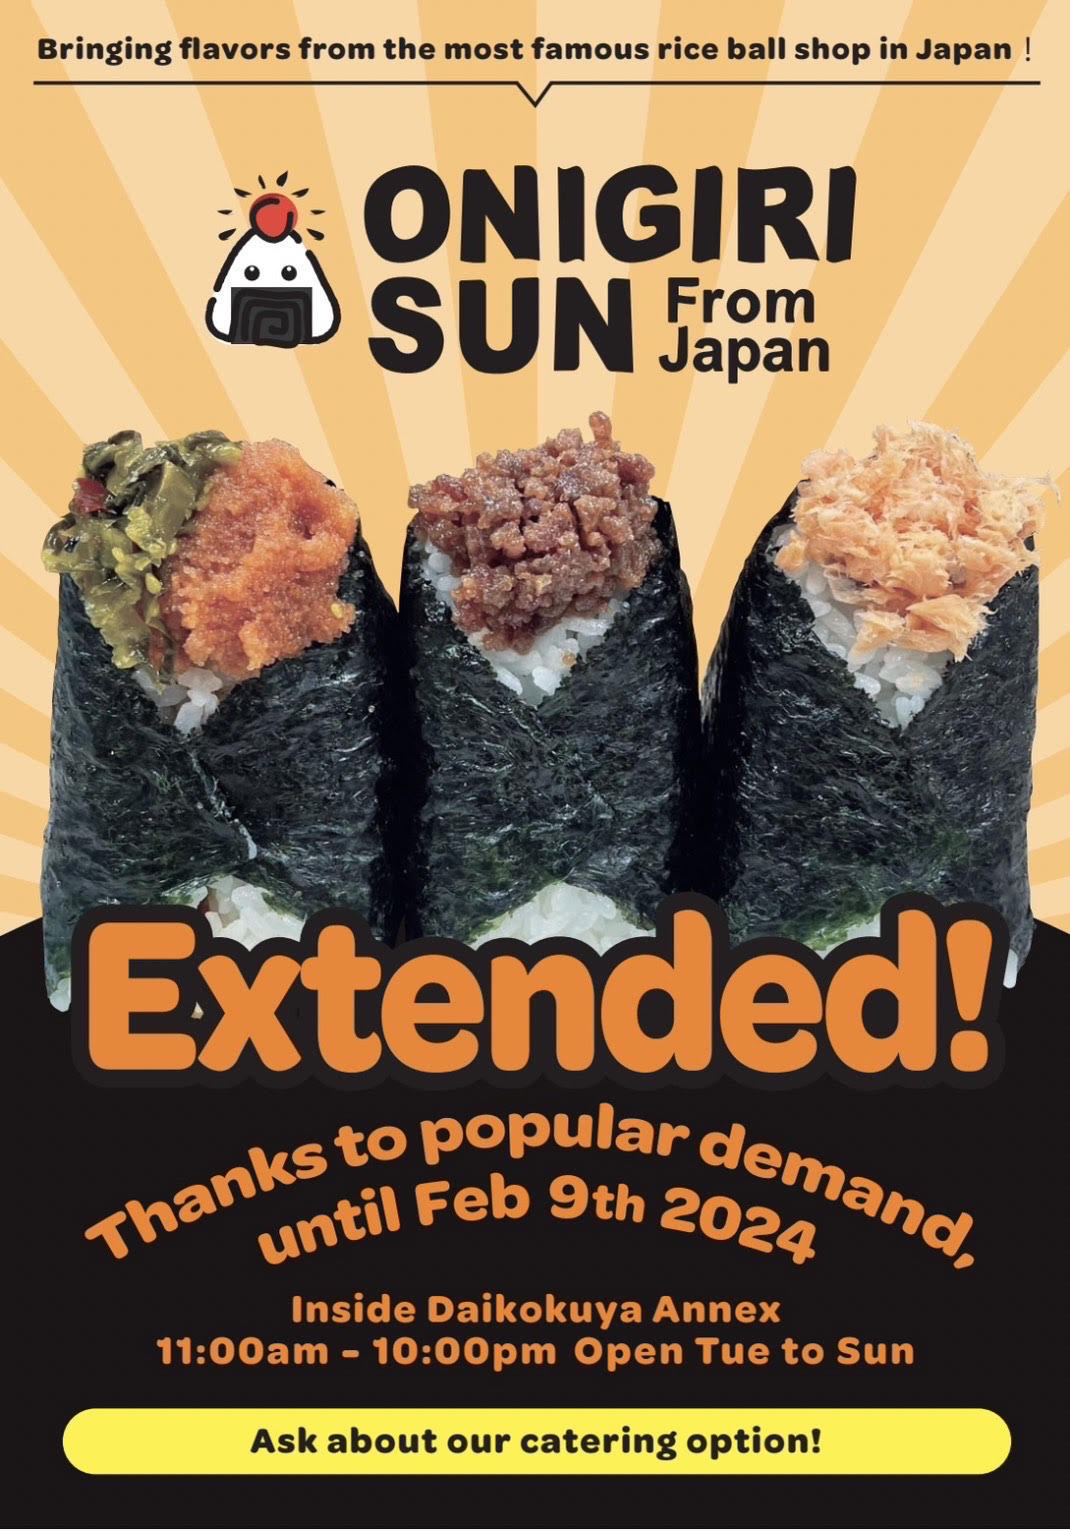 Bringing flavors from the most famous rice ball shop in Japan！Onigiri Sun from Japan OPEN! For limited time only From Aug.10th to Nov.9th Inside Daikokuya Annex 11:00am - 10:00pm open wed to sun Takeout Delivery OK! Onigiri Sun From Japan Topping $1~ You can choose up to 3 types from all ingredients ex cheese and more! Meat No.1 Soboro Beef $6.50 Japanese traditional flavored ground beef Soy meat +0.50 No.2 Stamina Yakiniku $6.50 Grilled pork with yakiniku sauce (Japanese BBQ sauce) No.3 Spam $6.50 Spam and yellow pickled radish with mayo sauce No.4 Karaage $6.50 Japanese deep fried chicken with mayo sauce Seafood No.5 Tuna $6.50 Tuna with mayo sauce No.6 Mentaiko $6.50 Spicy raw tml cod roe No.7 Mentai Mayo Cream Cheese $6.50 Spicy cod roe tml with cream cheese No.8 Hokkaido Sake $7.00 Grilled Salmon from Hokkaido No.9 Okaka $5.50 Bonito flakes mixed with soy sauce Others No.10 Honey Umeboshi $5.50 Honey pickled plums No.11 Takana Pickled mustard leavesof with sesame oil No.12 Kizami Shiitake $6.00 Shiitake mushroom and kelp boiled in soy sauce No.13 Tsukudani Kombu $5.00 Boiled and sweetened sea kelp Onigiri Sun from Japan address 321 1/4 E. 1st St. Los Angeles CA 90012 Daikokuya Annex delivery Services Uber eats Doordash Grubhub ChowNow Hungry Panda